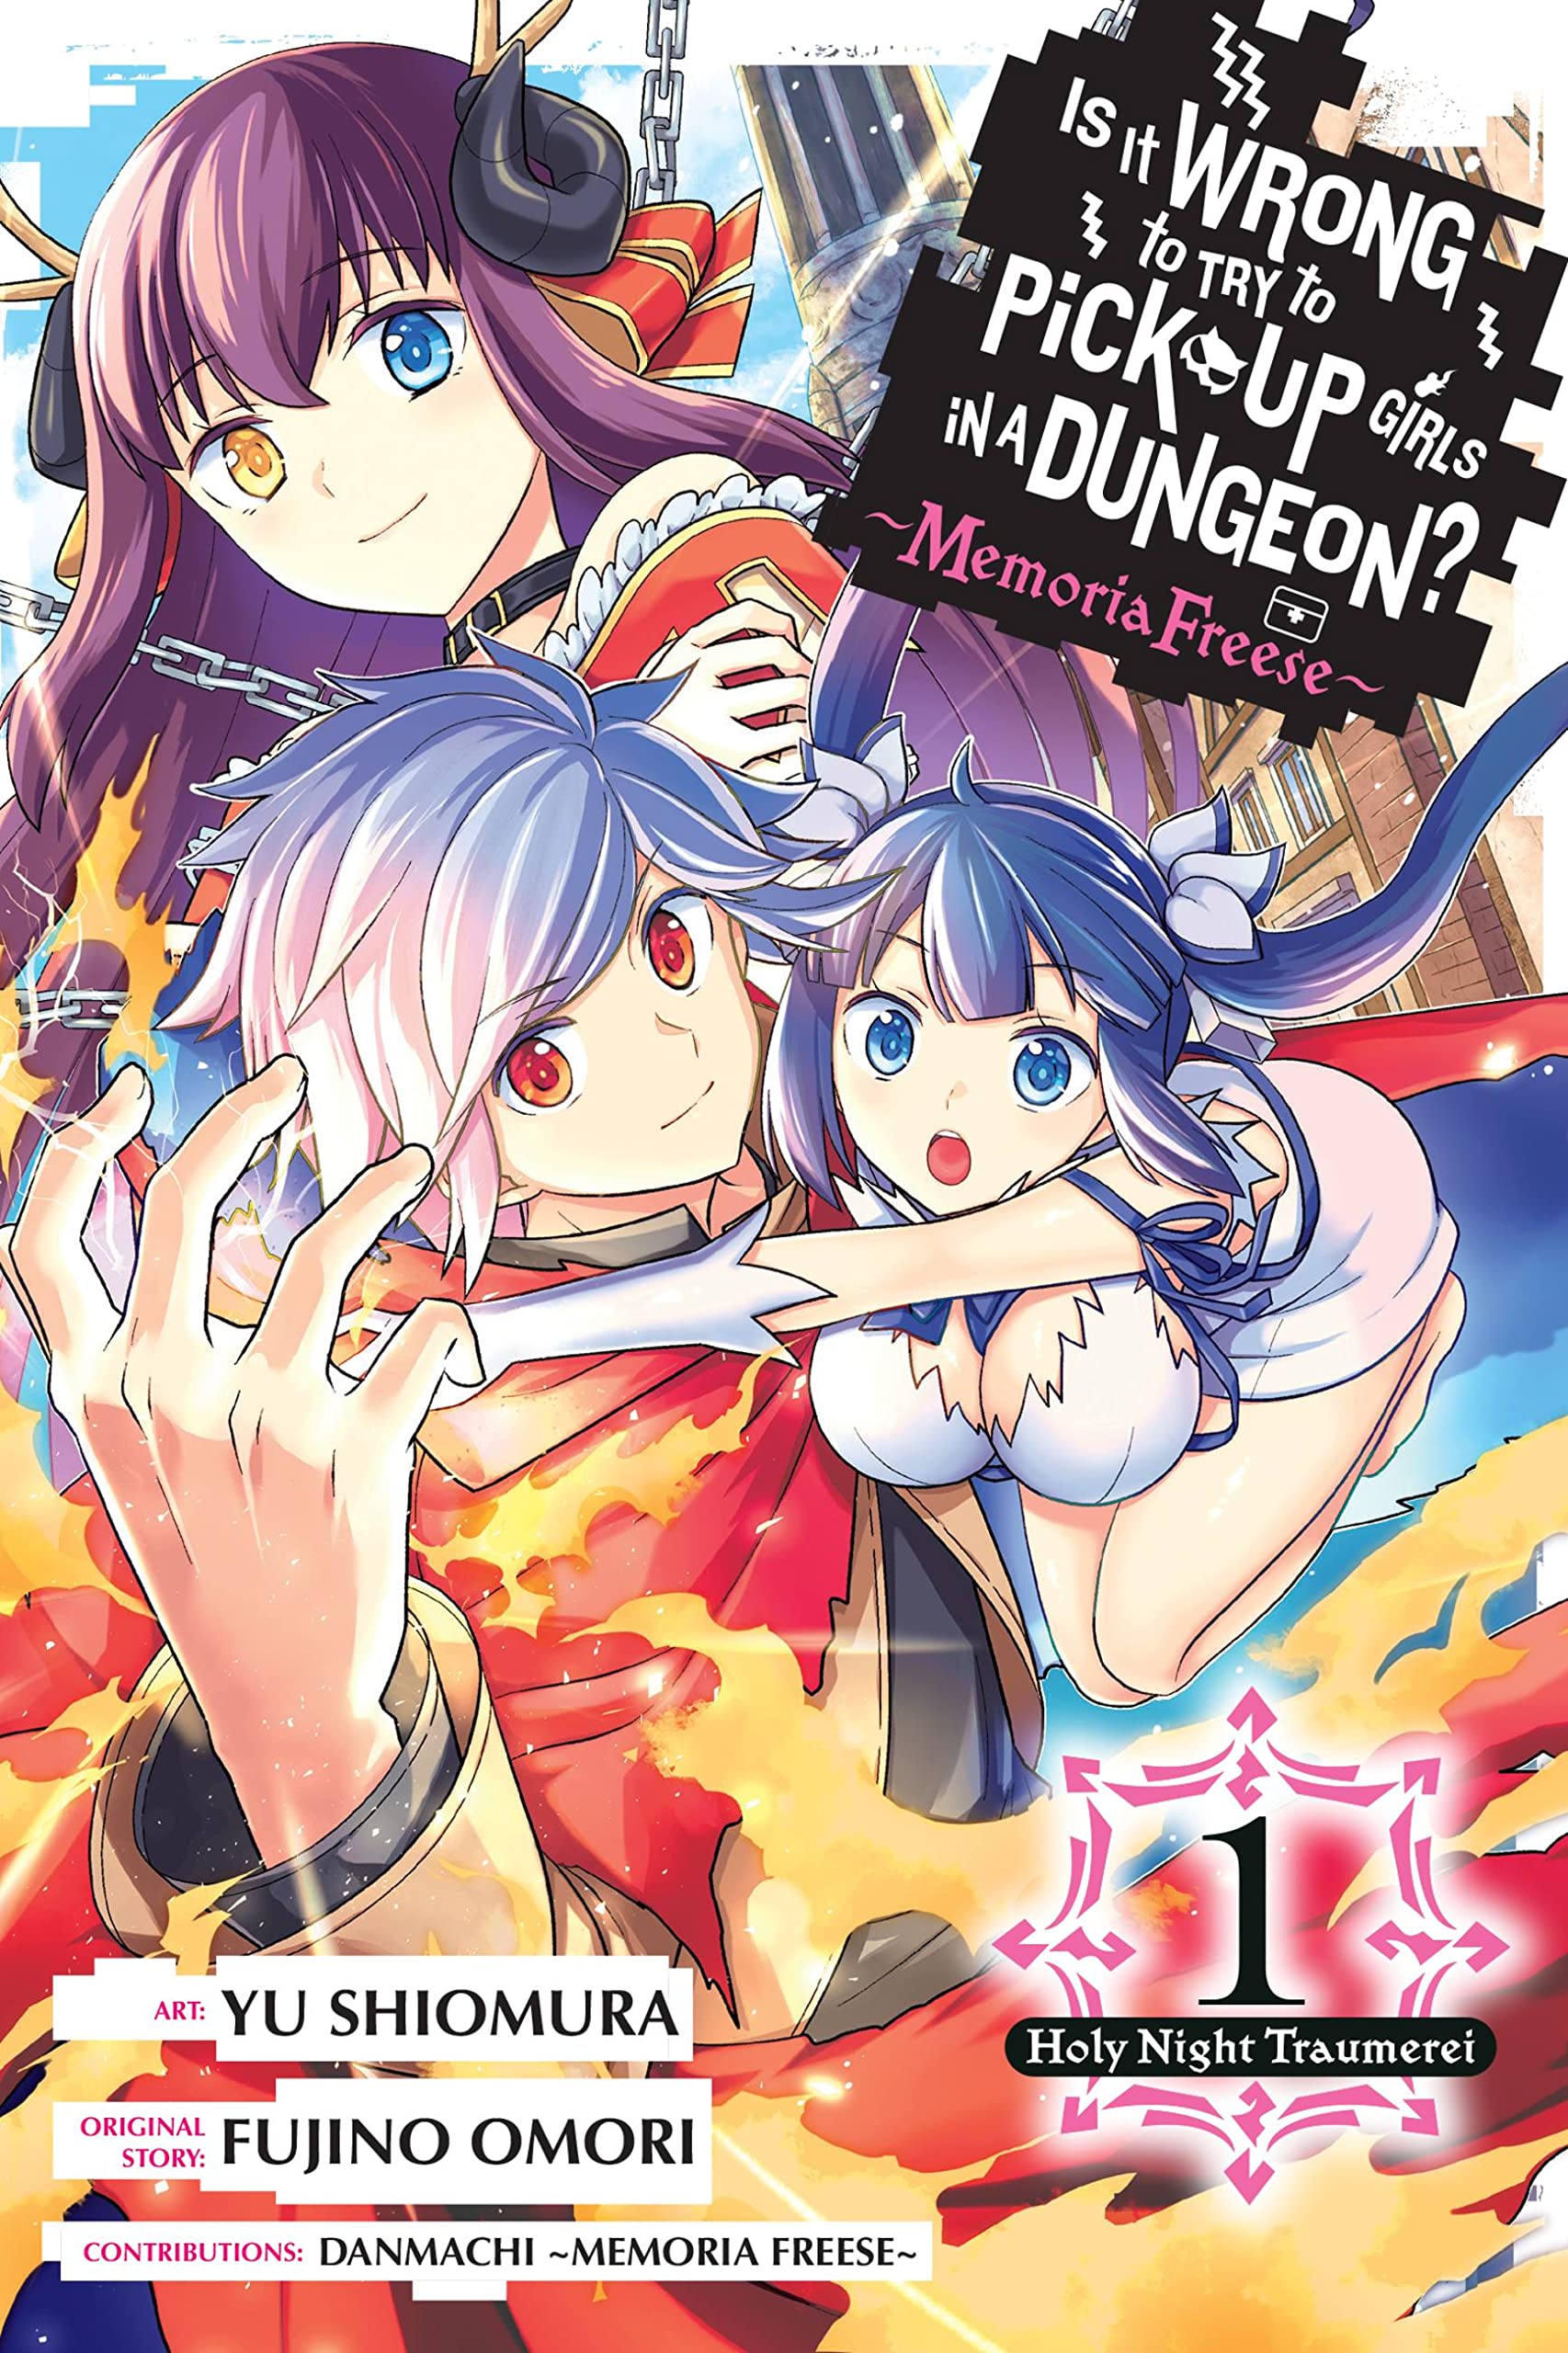 Is It Wrong to Try to Pick Up Girls in a Dungeon? Memoria Freese Vol. 01: Holy Night Traumerei